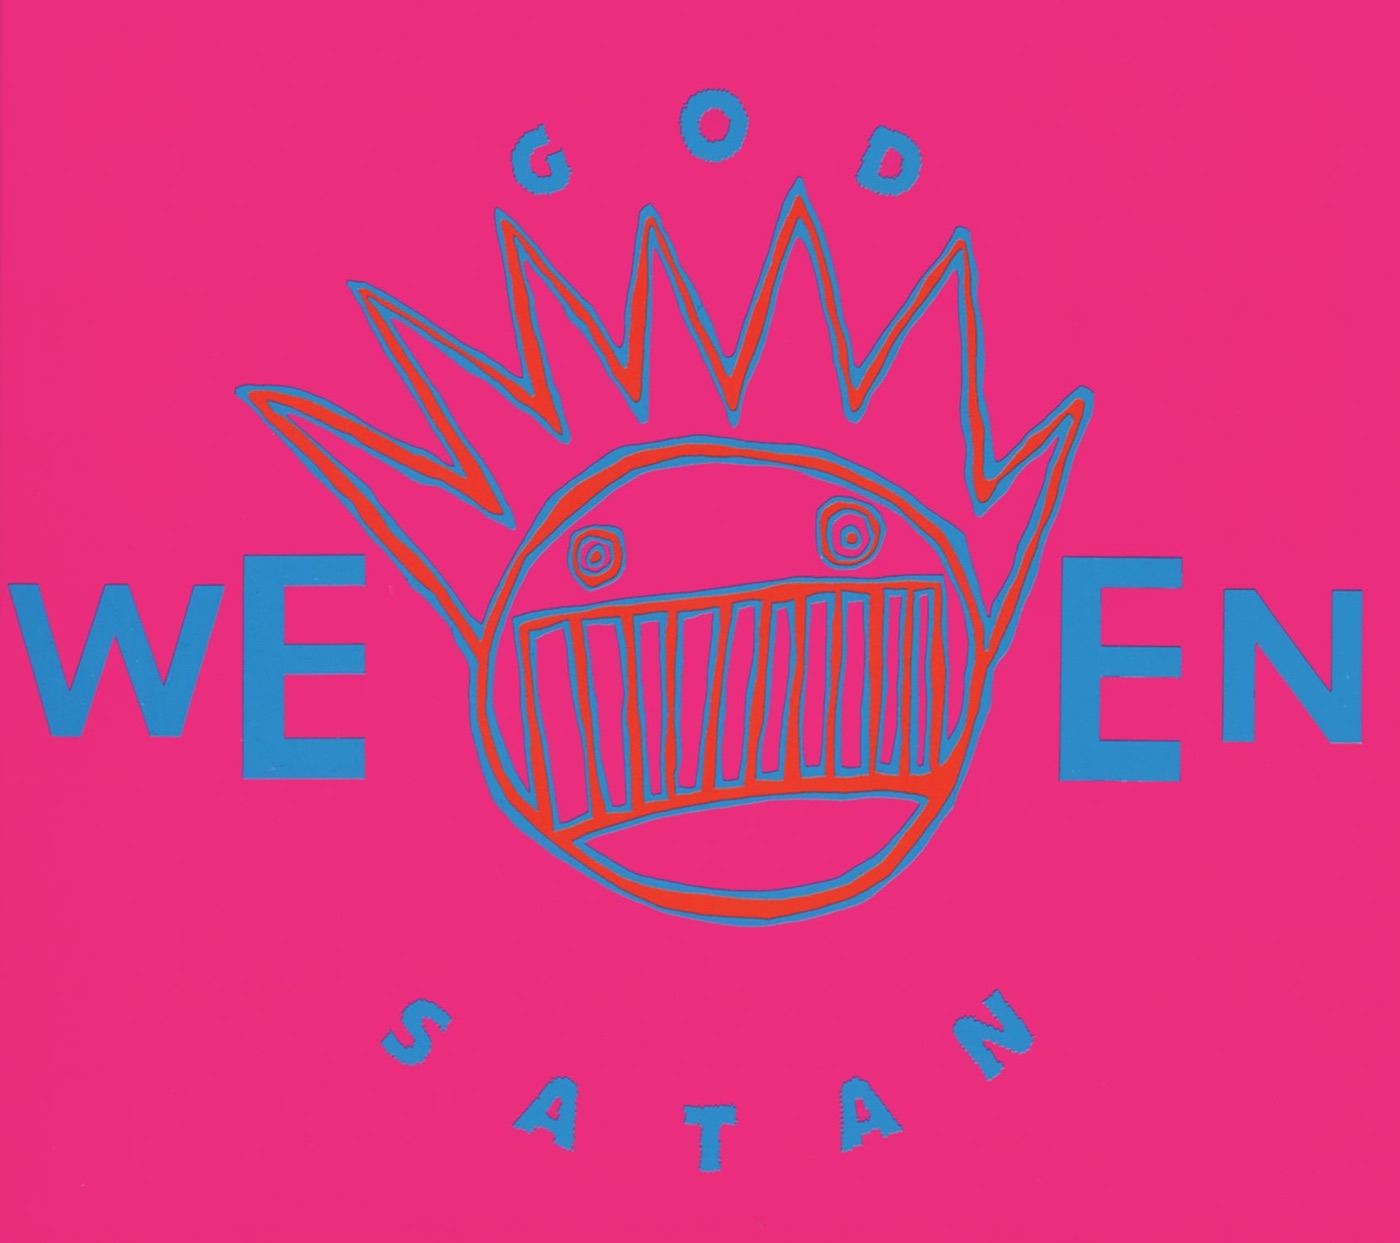 God Ween Satan: The Oneness by Ween